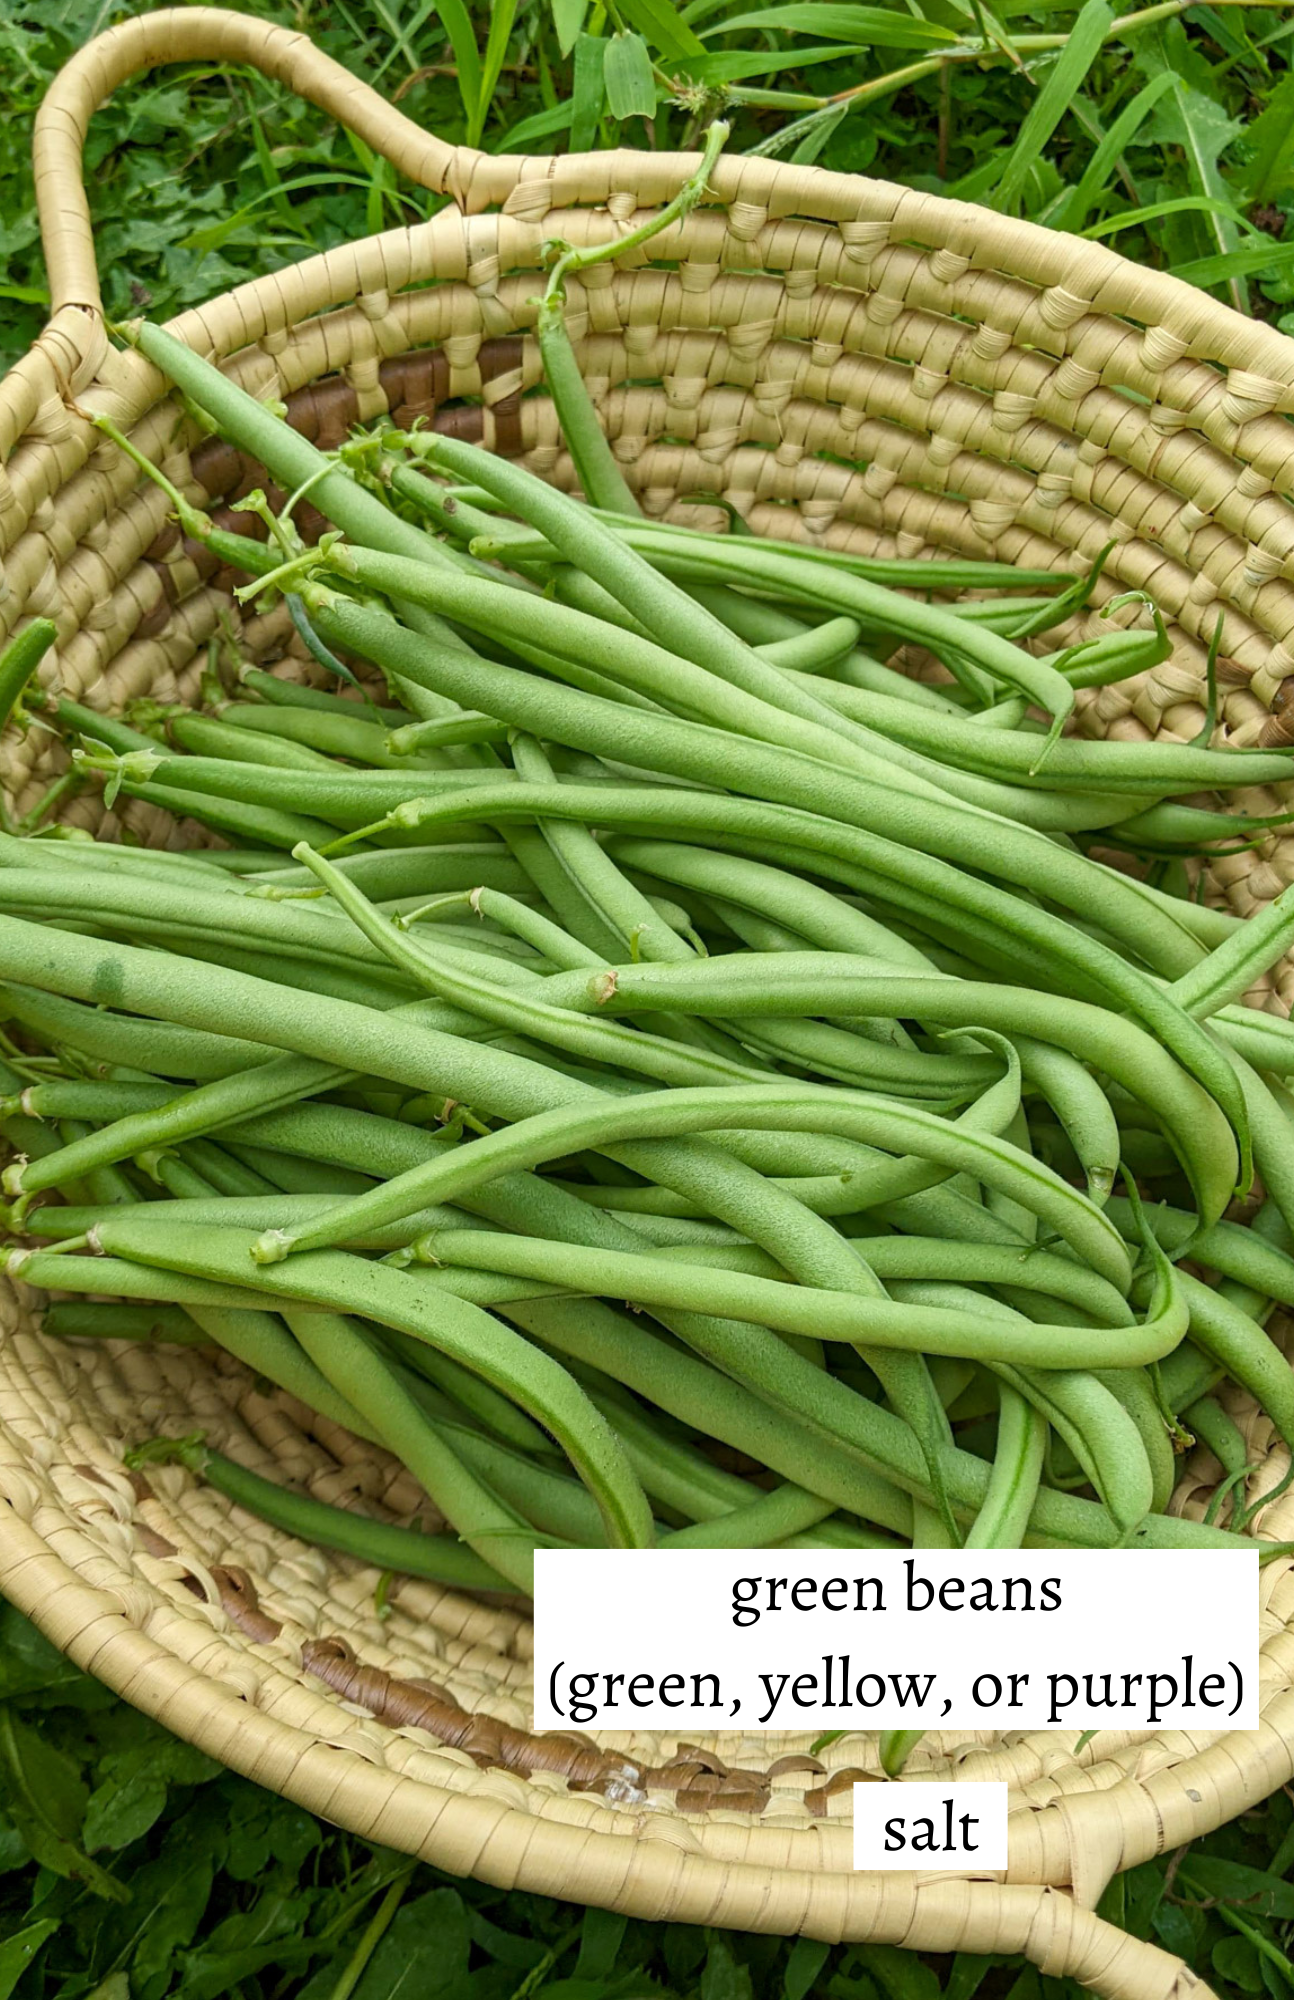 A basket of green beans picked from the garden, labeled to blanch and freeze.